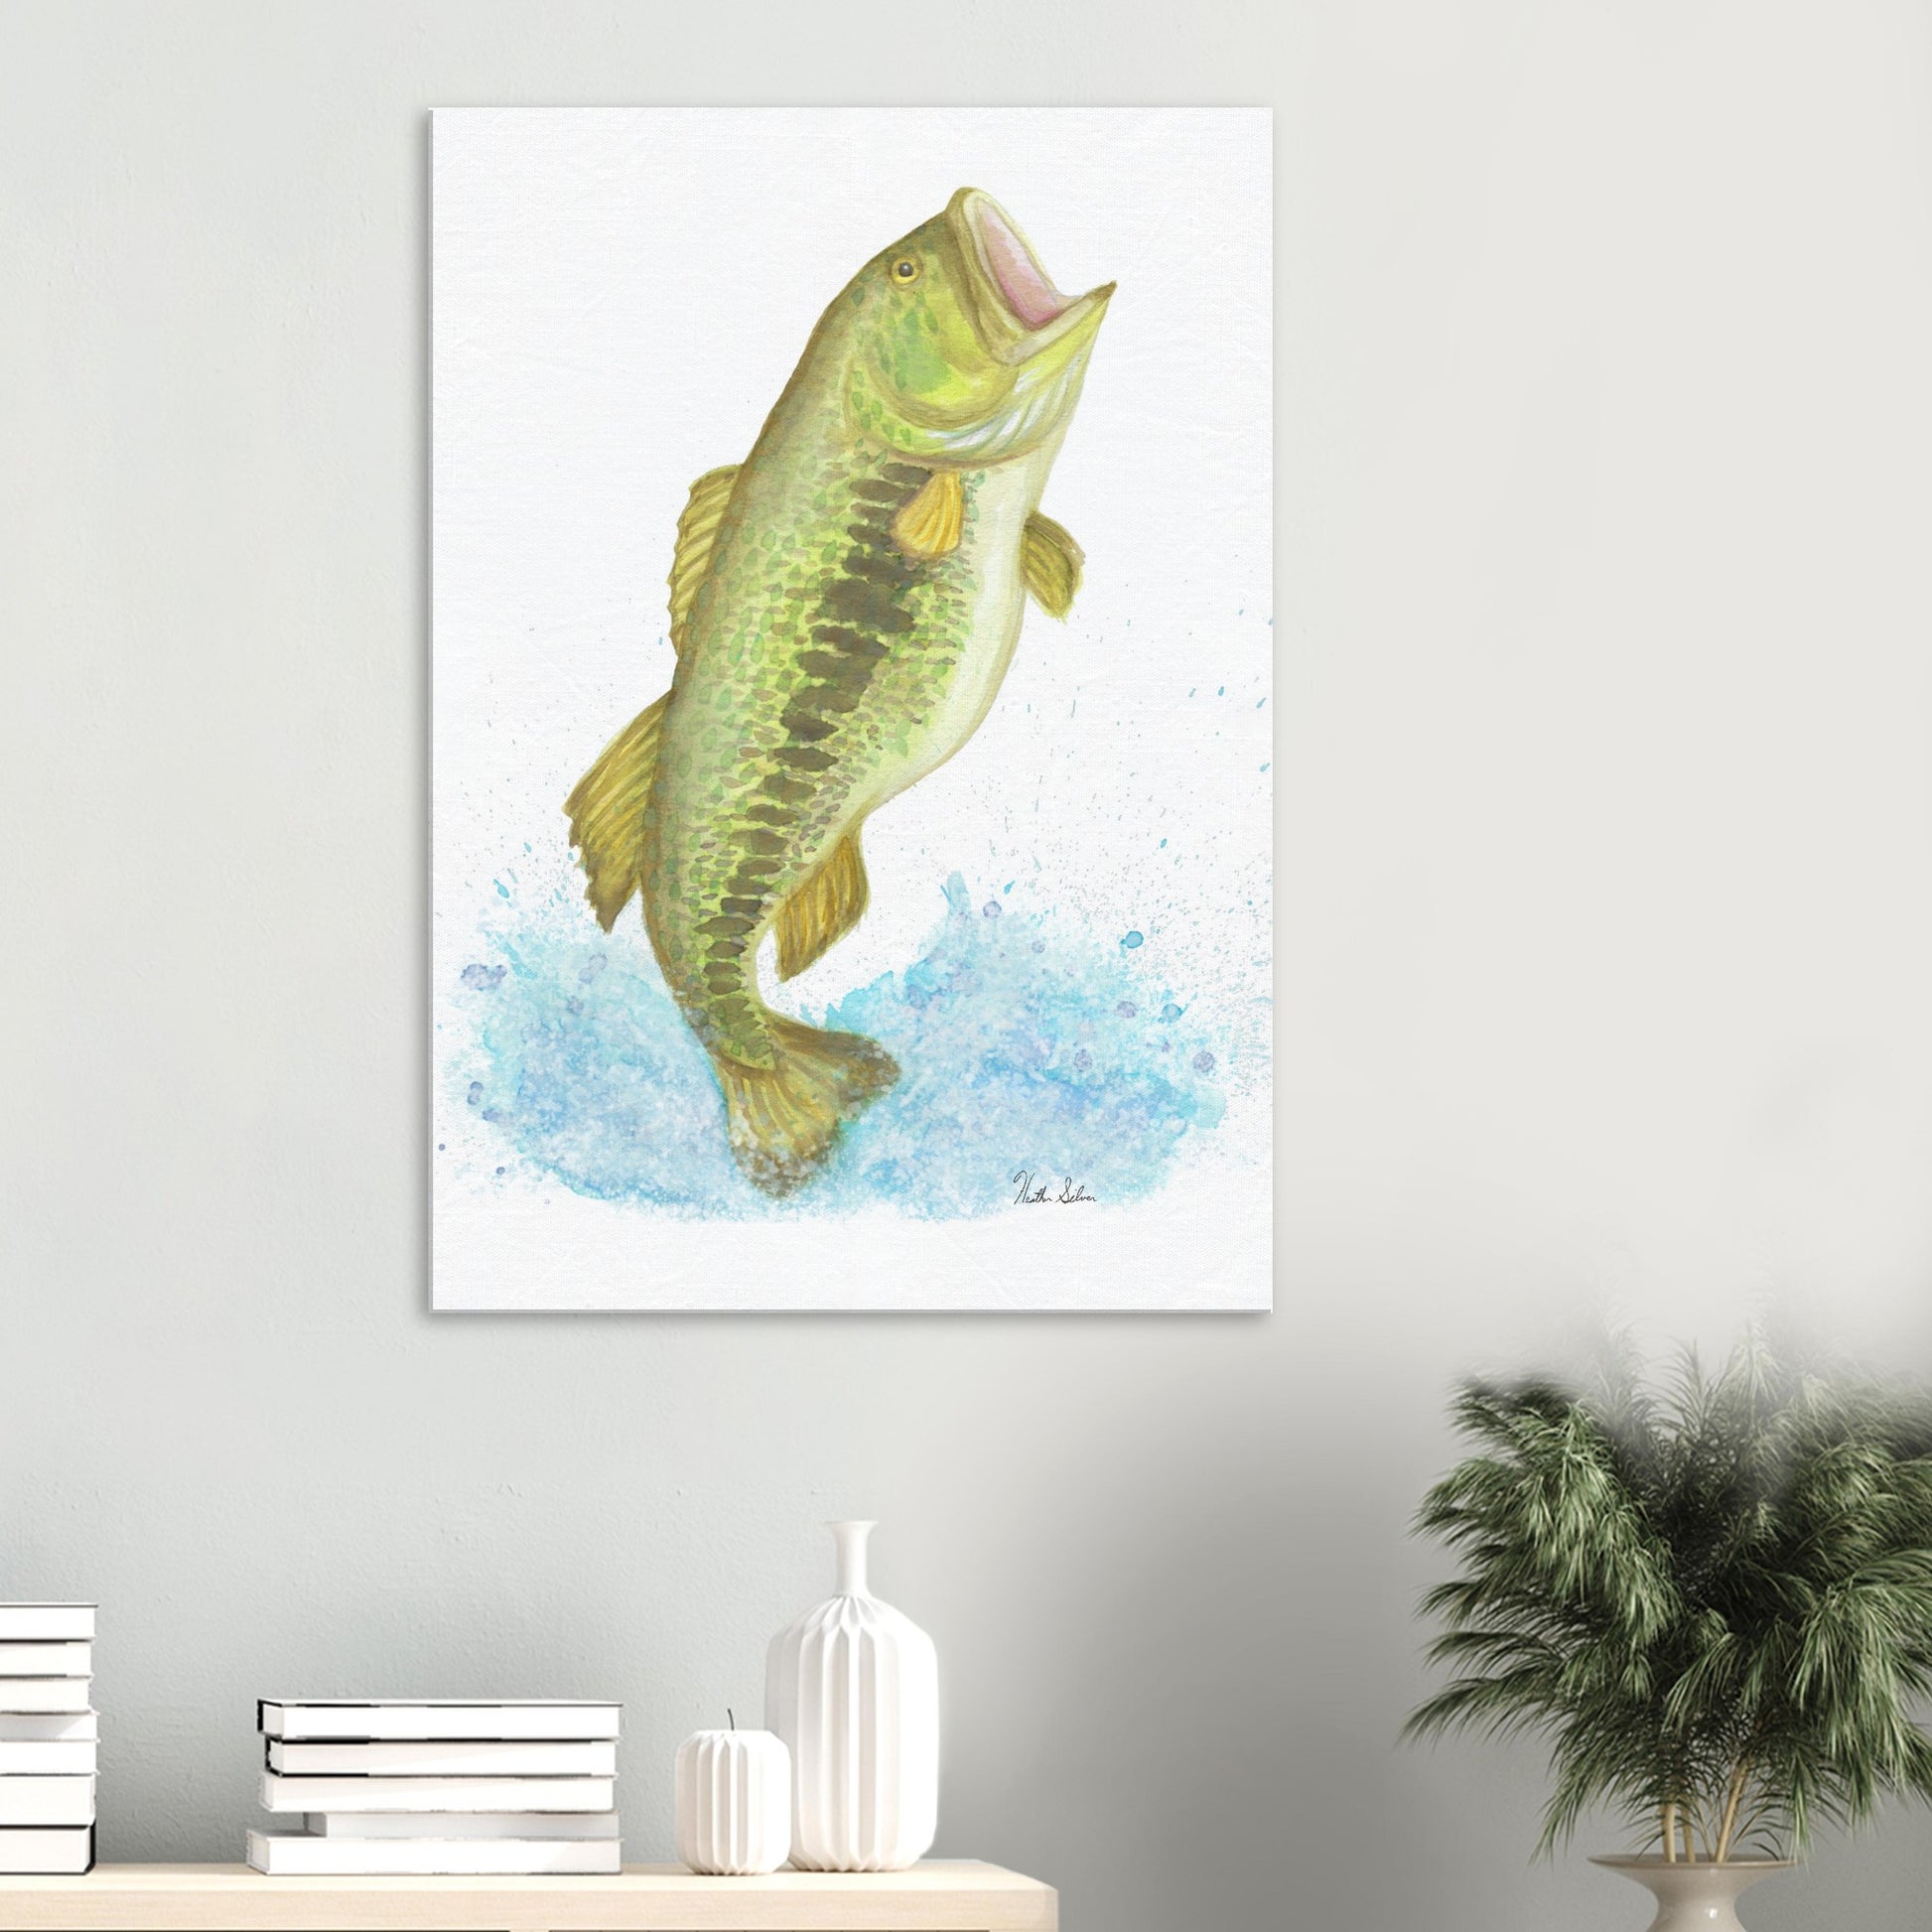 28 by 40 inch slim canvas wall art print featuring a watercolor painting of a largemouth bass leaping from the water. Shown above desktop with books and potted plant.